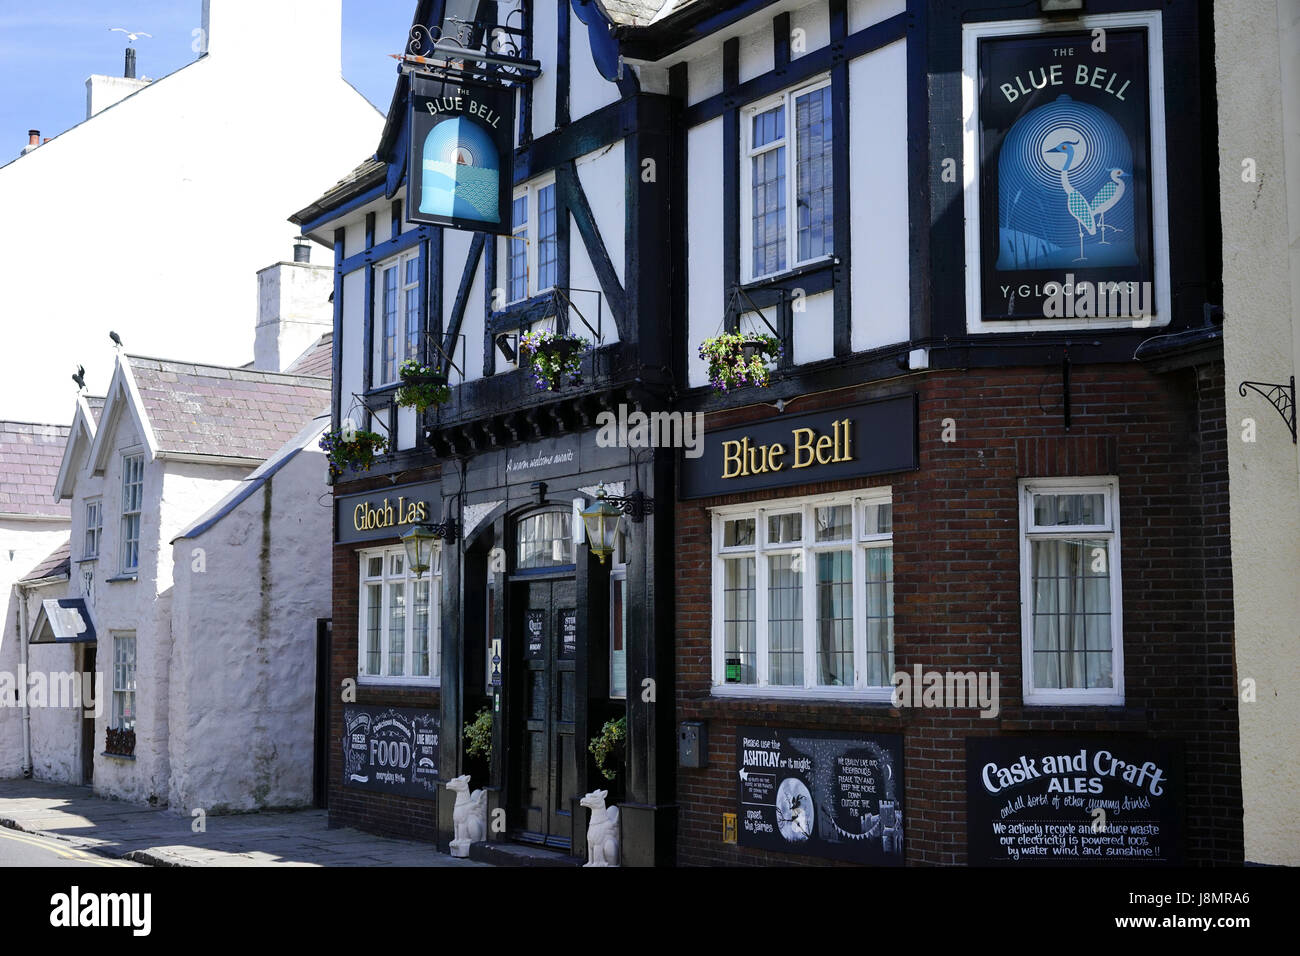 Blue Bell Public House at Conwy, North Wales, UK. Stock Photo